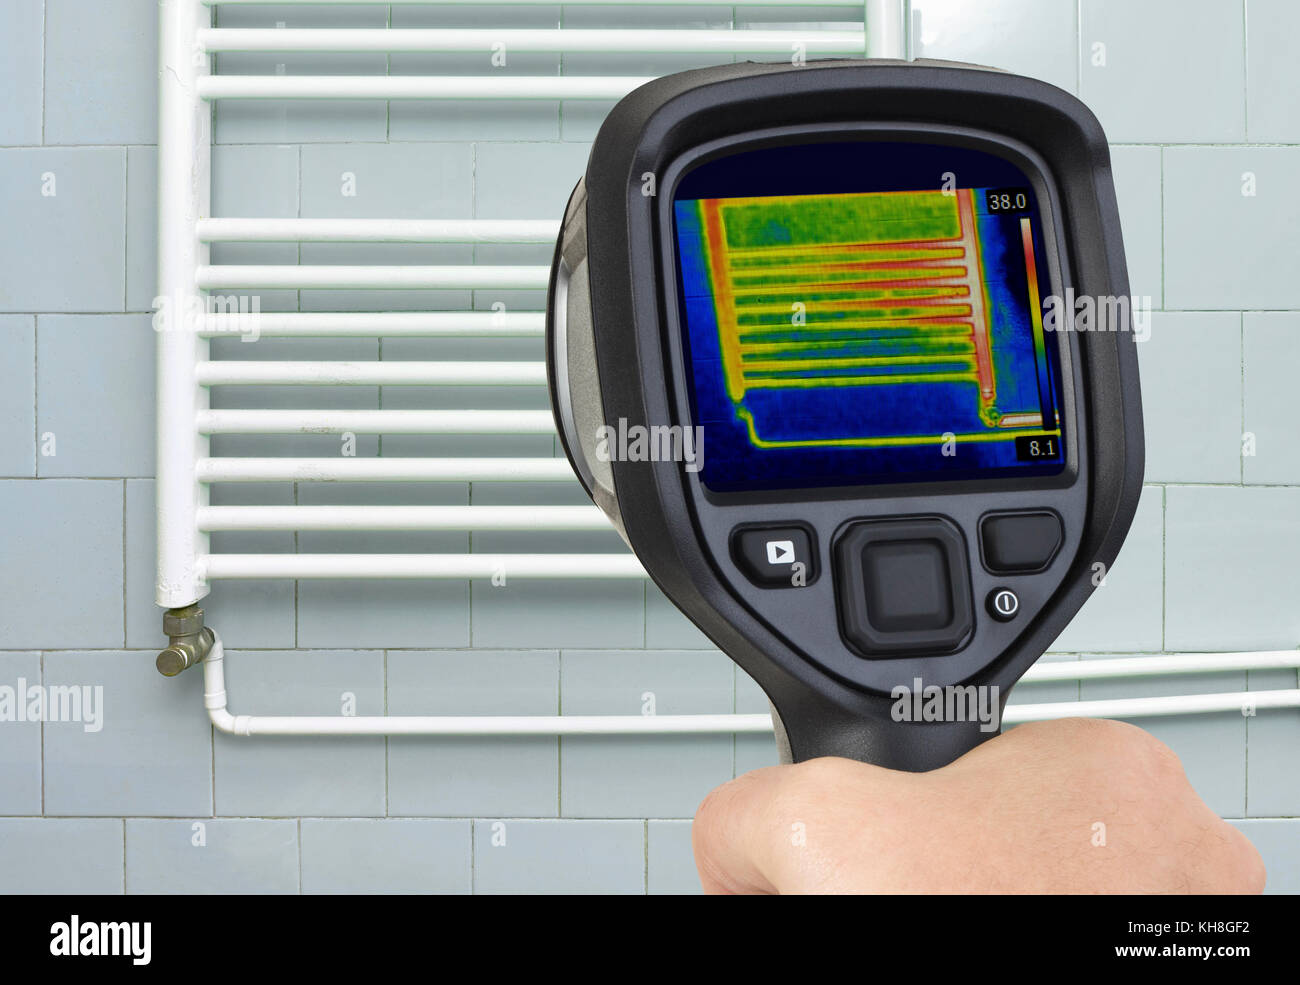 Thermal Image of Central Heating Element Stock Photo